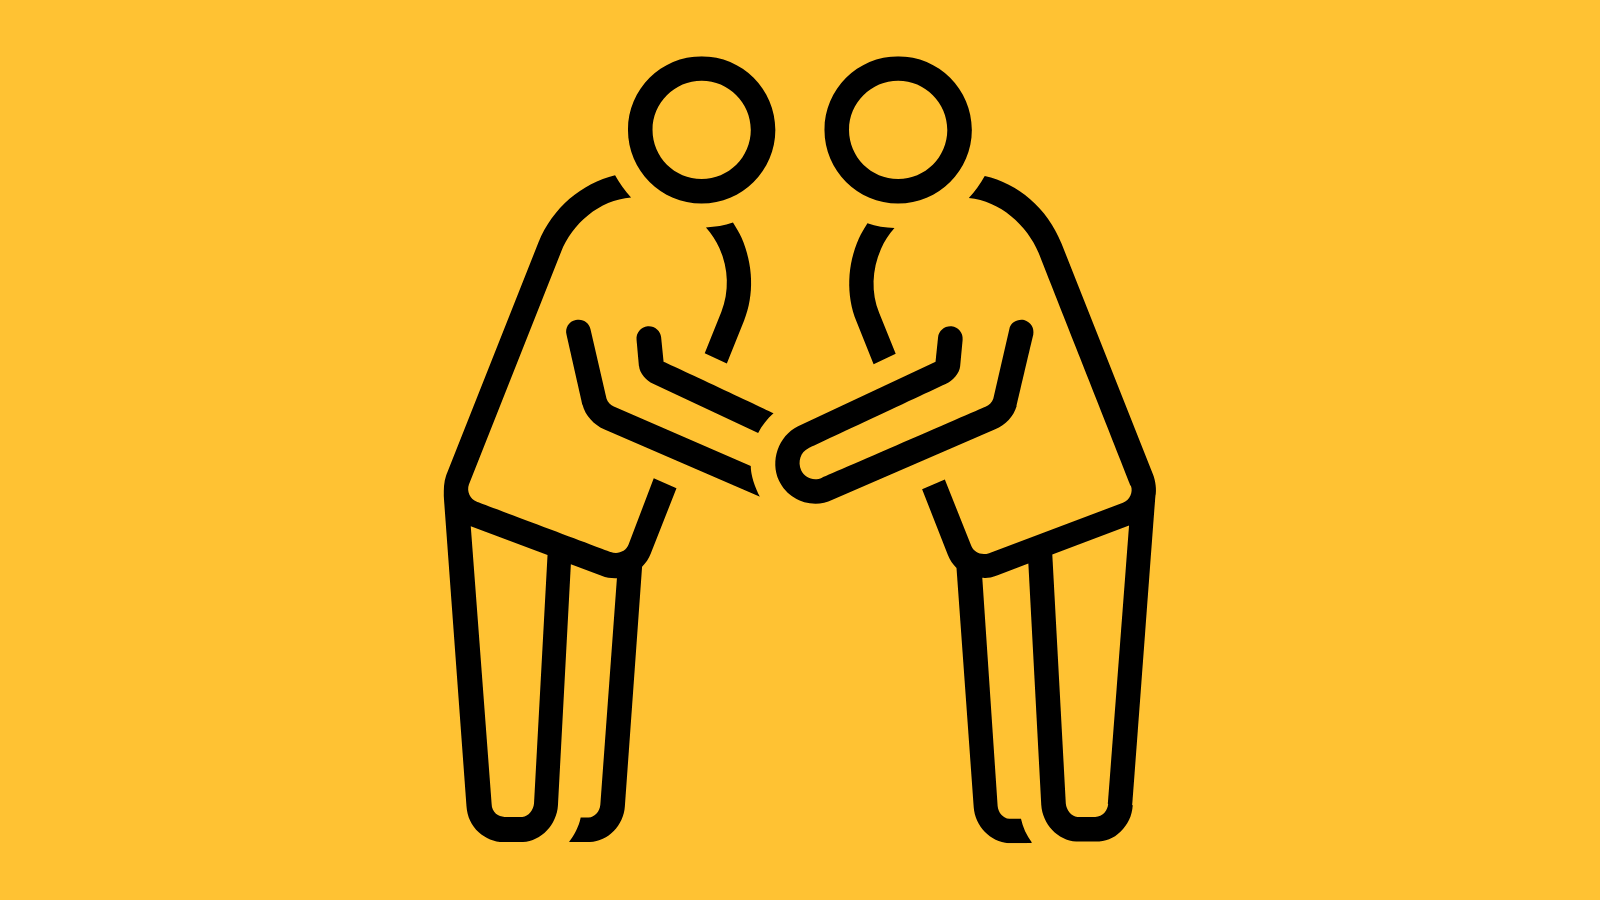 A minimalist graphic of two people shaking hands